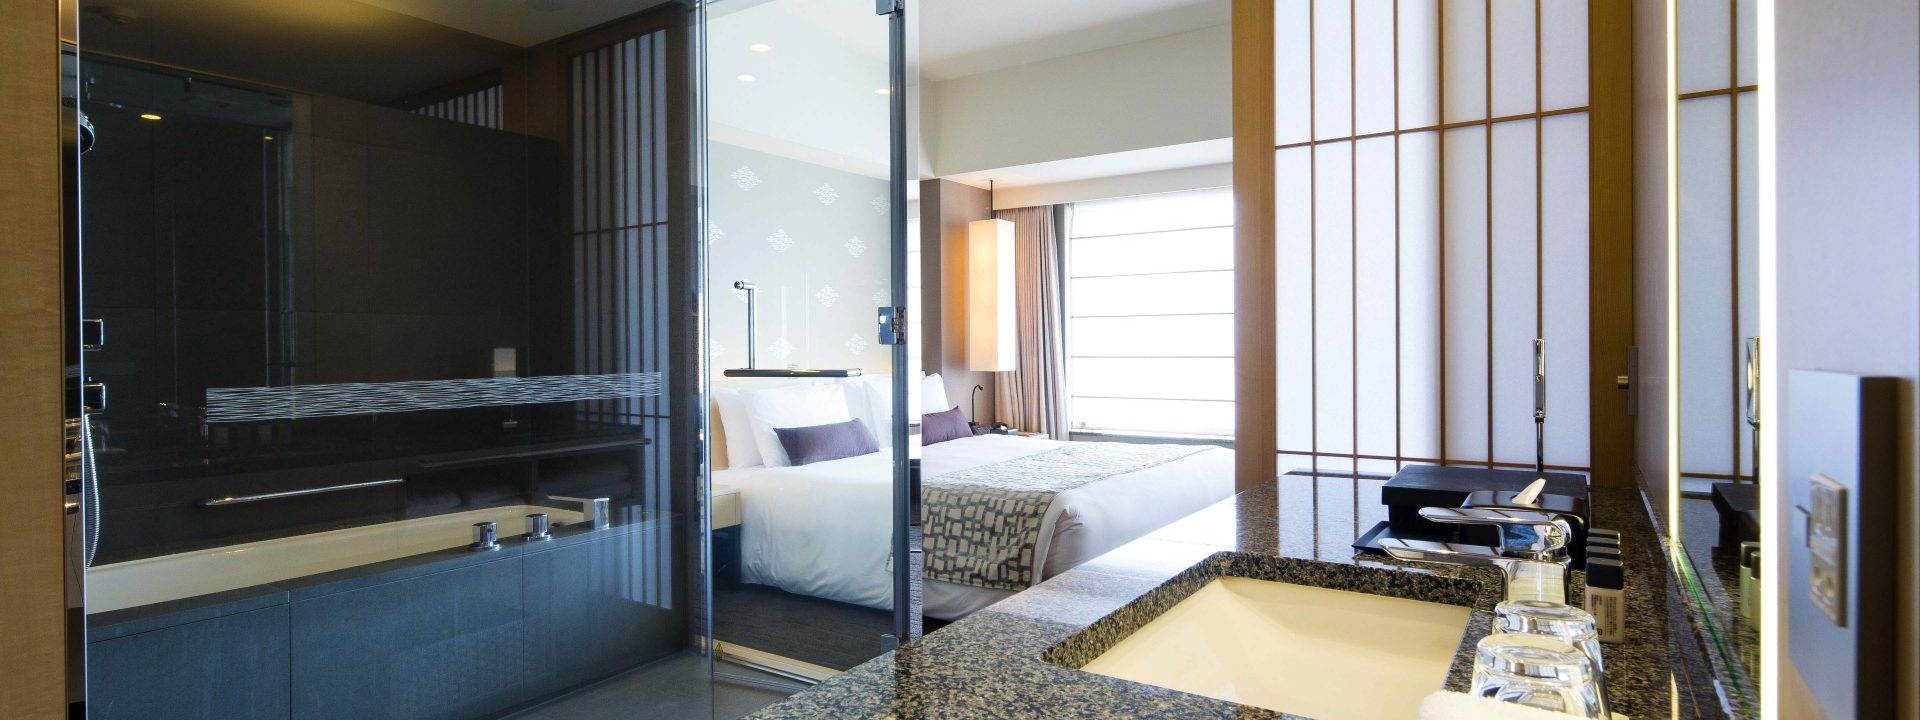 The Capitol Hotel Tokyu offers a rare amenity in Tokyo—space!